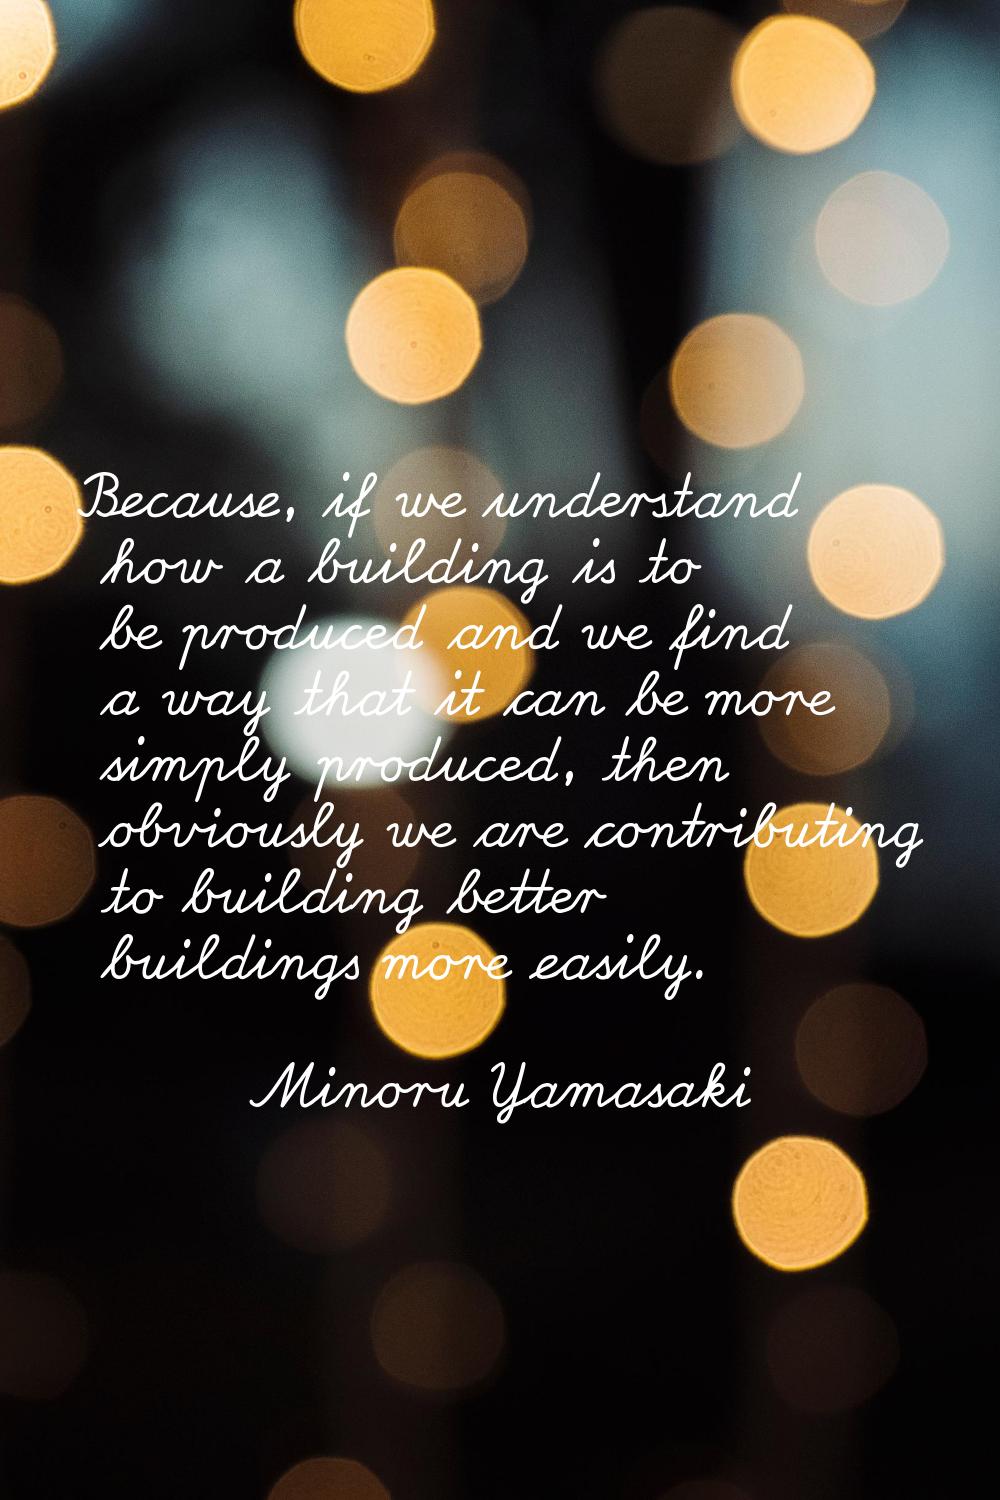 Because, if we understand how a building is to be produced and we find a way that it can be more si